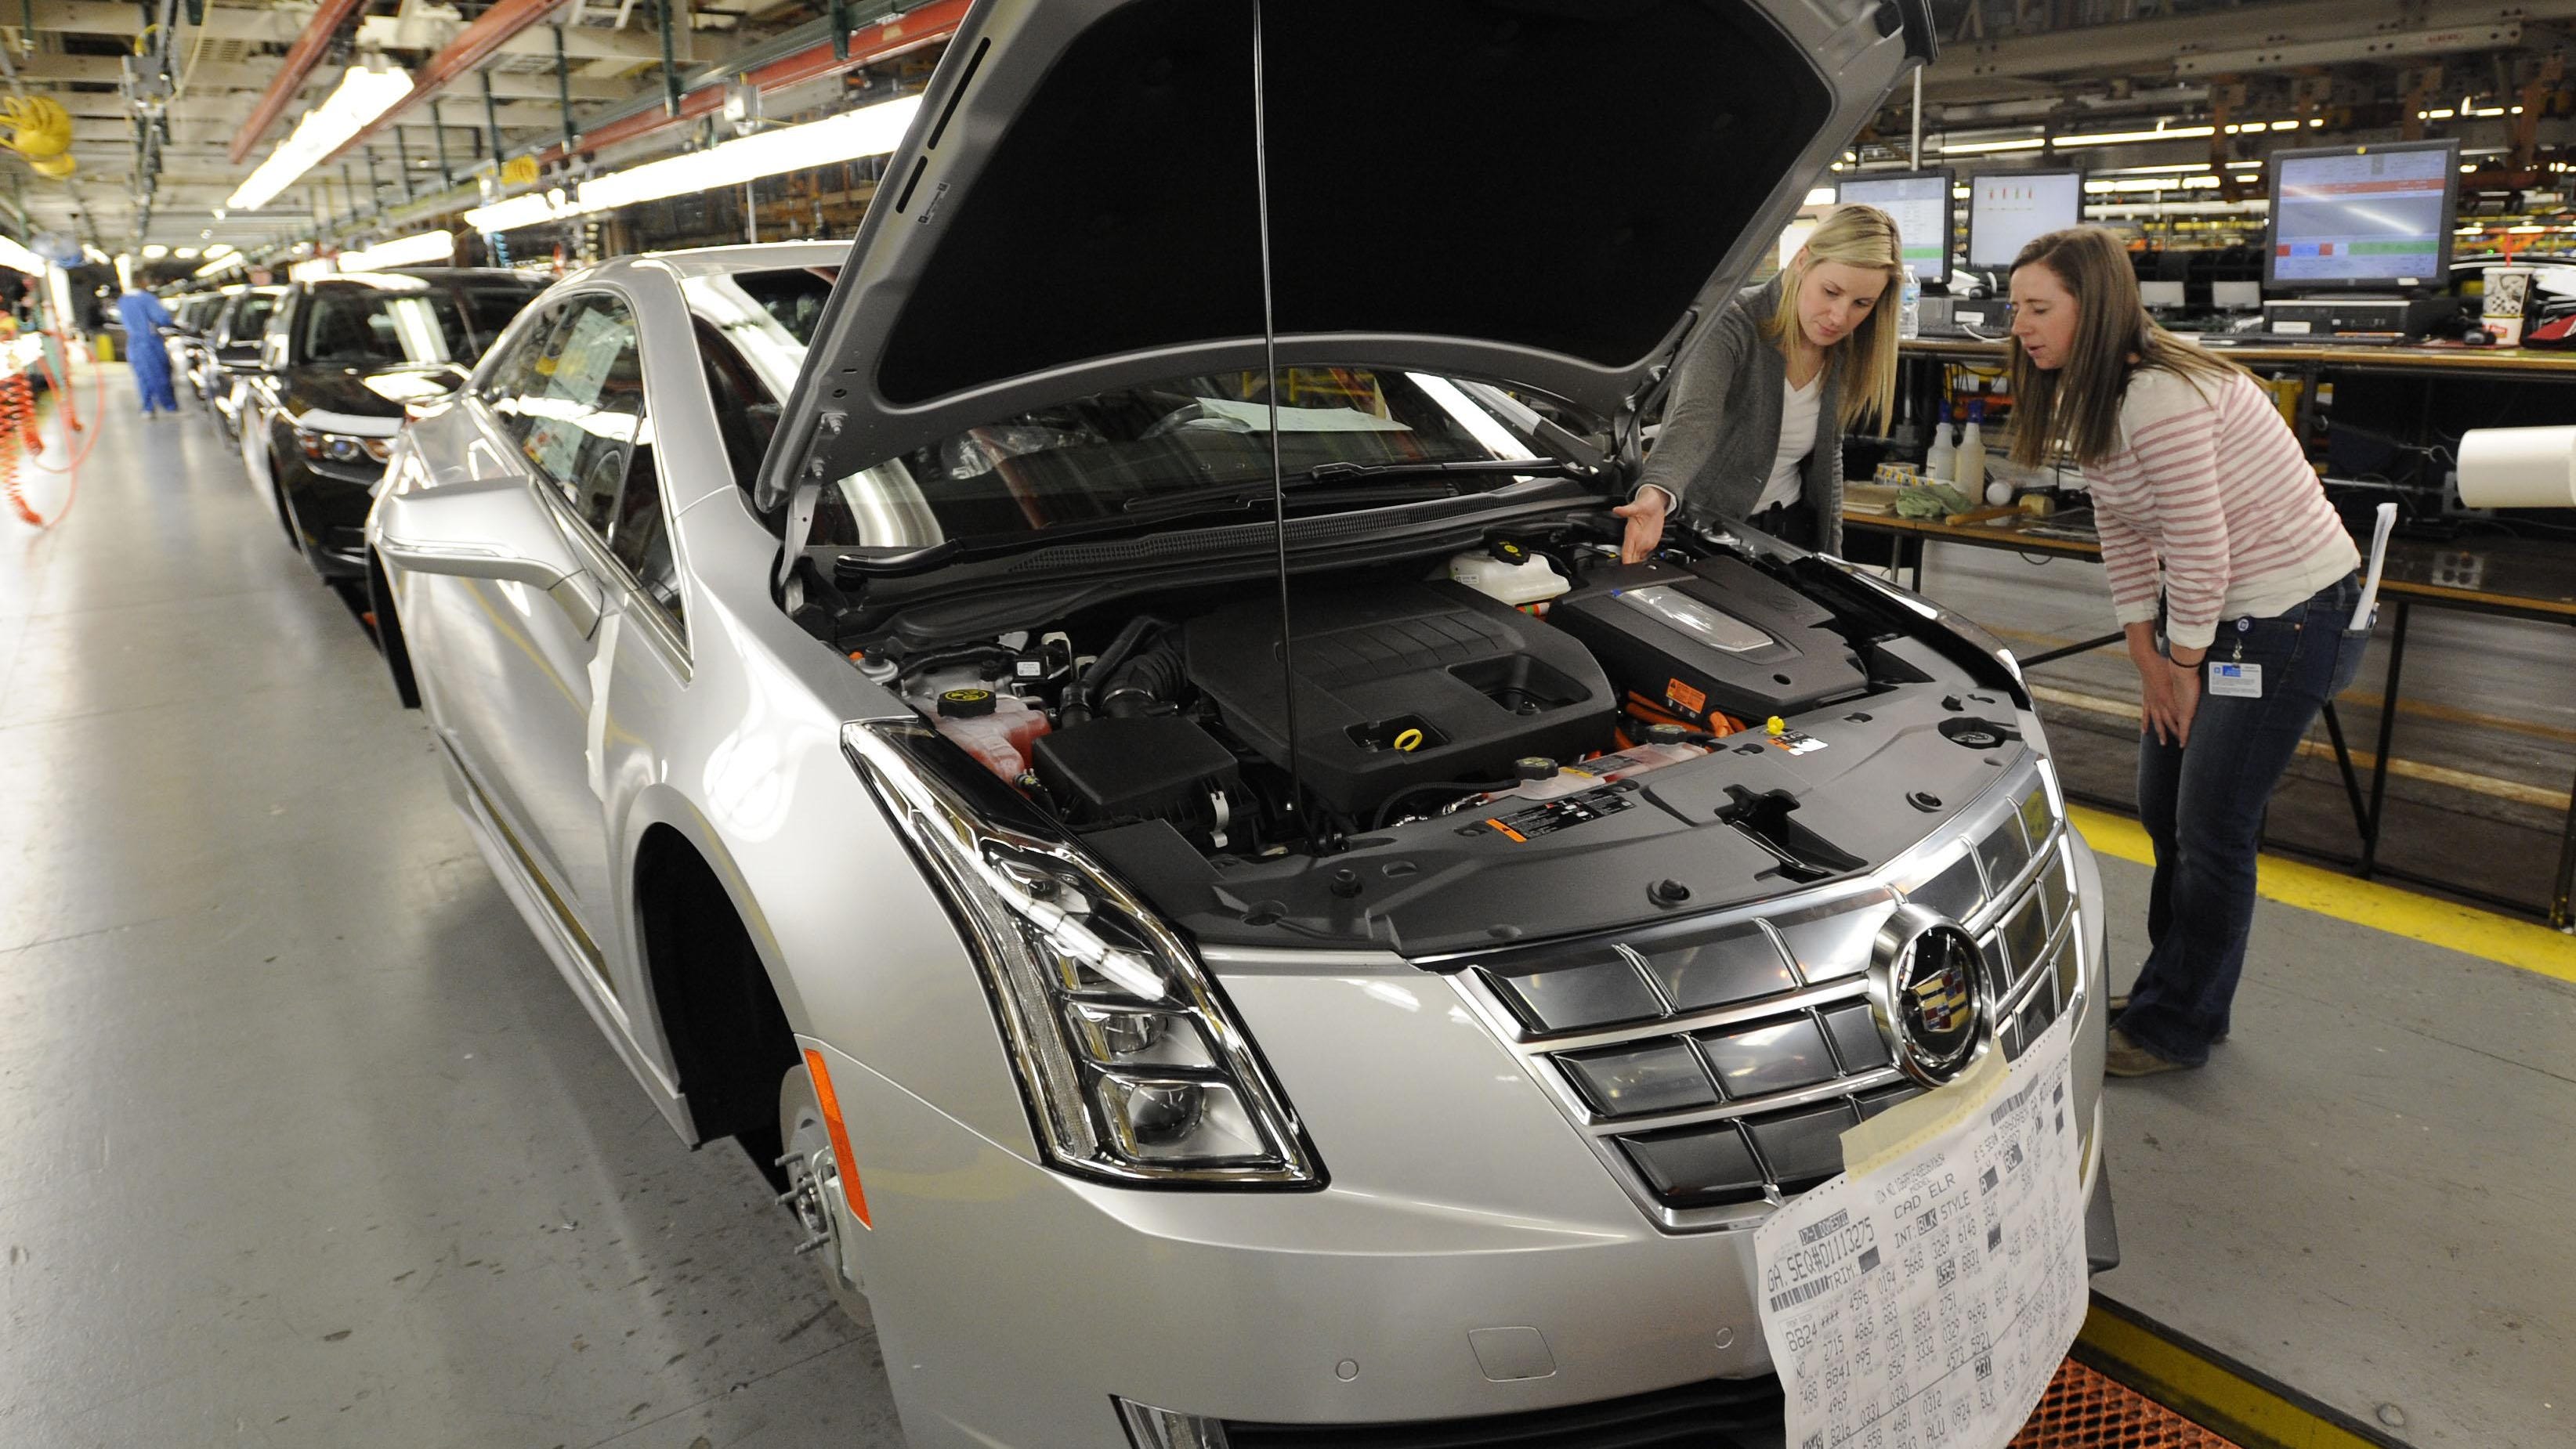 Labor costs per vehicle at GM will drop to $2,350 in 2019 from $2,374 in 2014.